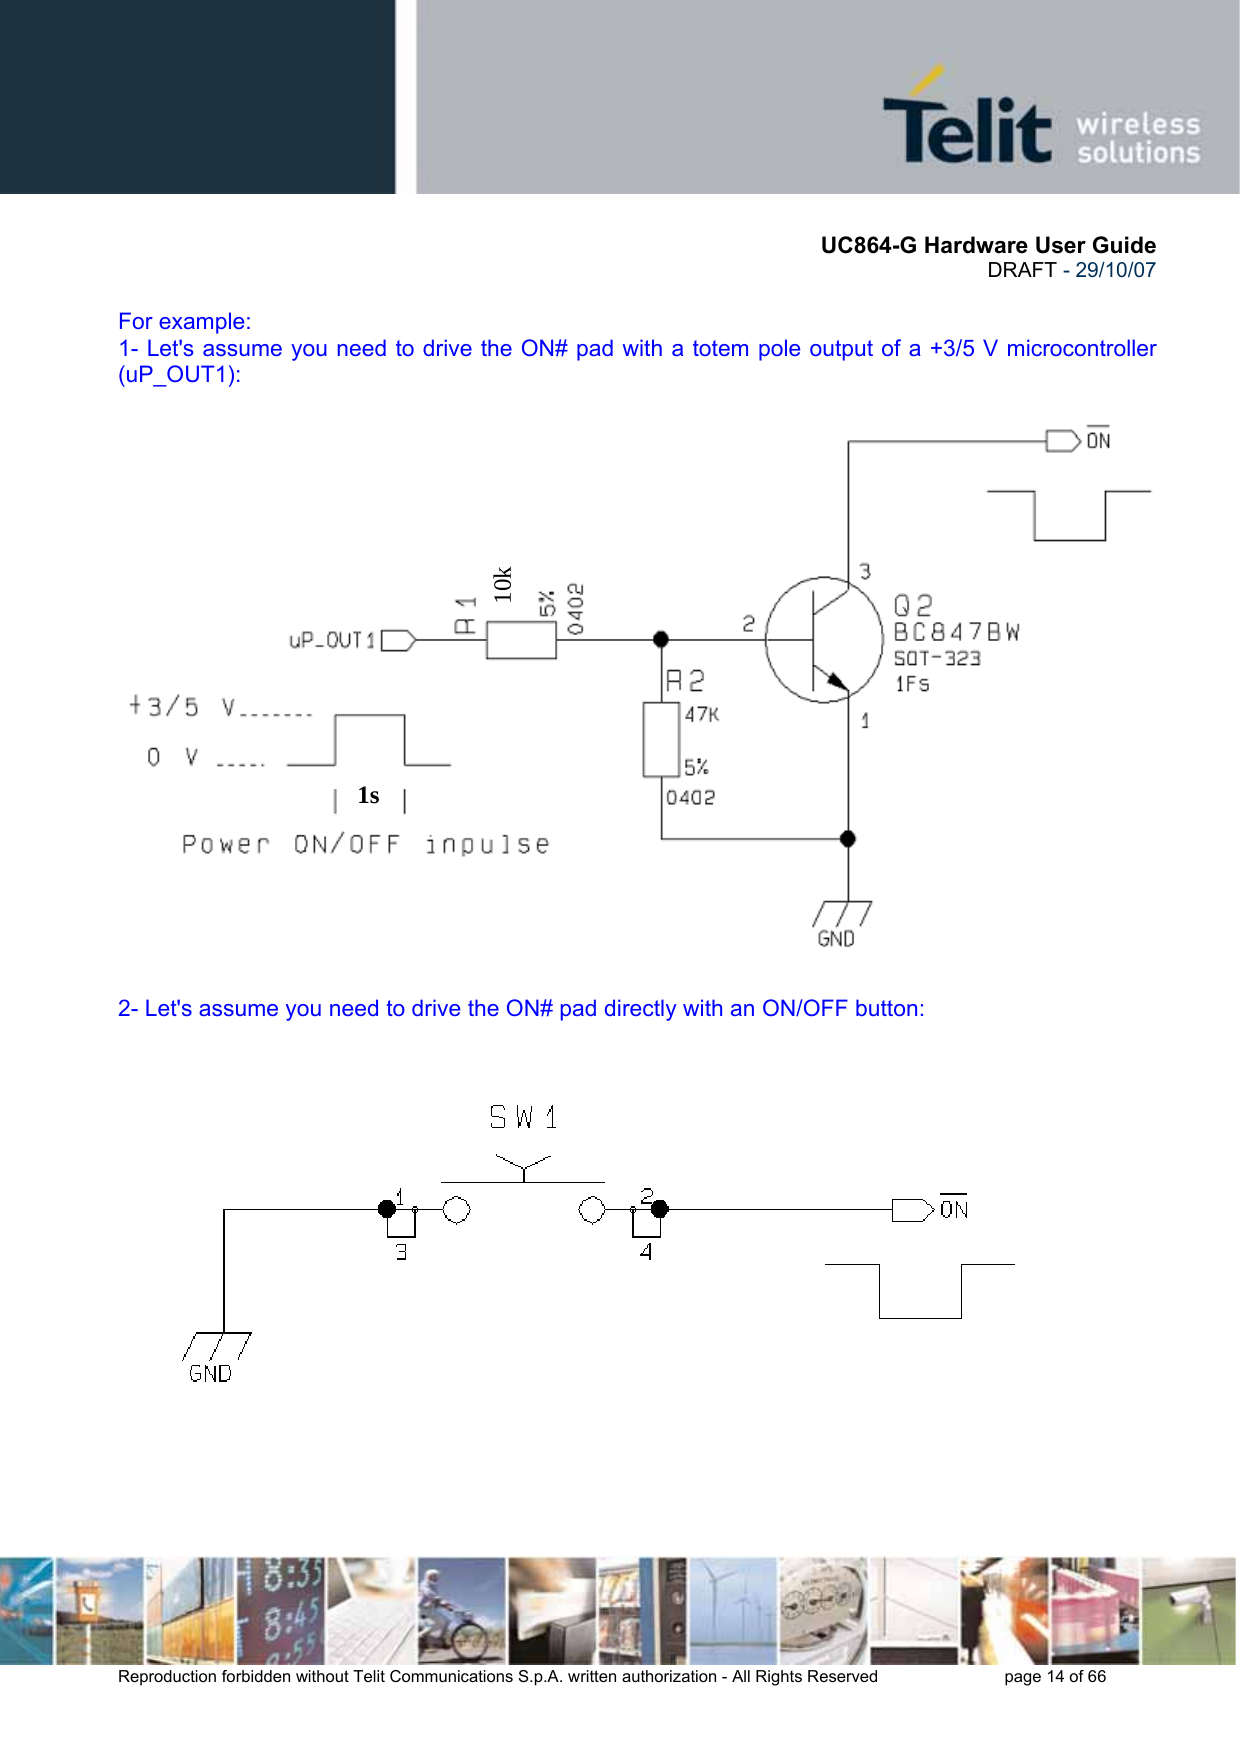       UC864-G Hardware User Guide  DRAFT - 29/10/07      Reproduction forbidden without Telit Communications S.p.A. written authorization - All Rights Reserved    page 14 of 66   For example: 1- Let&apos;s assume you need to drive the ON# pad with a totem pole output of a +3/5 V microcontroller (uP_OUT1):  2- Let&apos;s assume you need to drive the ON# pad directly with an ON/OFF button:   1s10k 